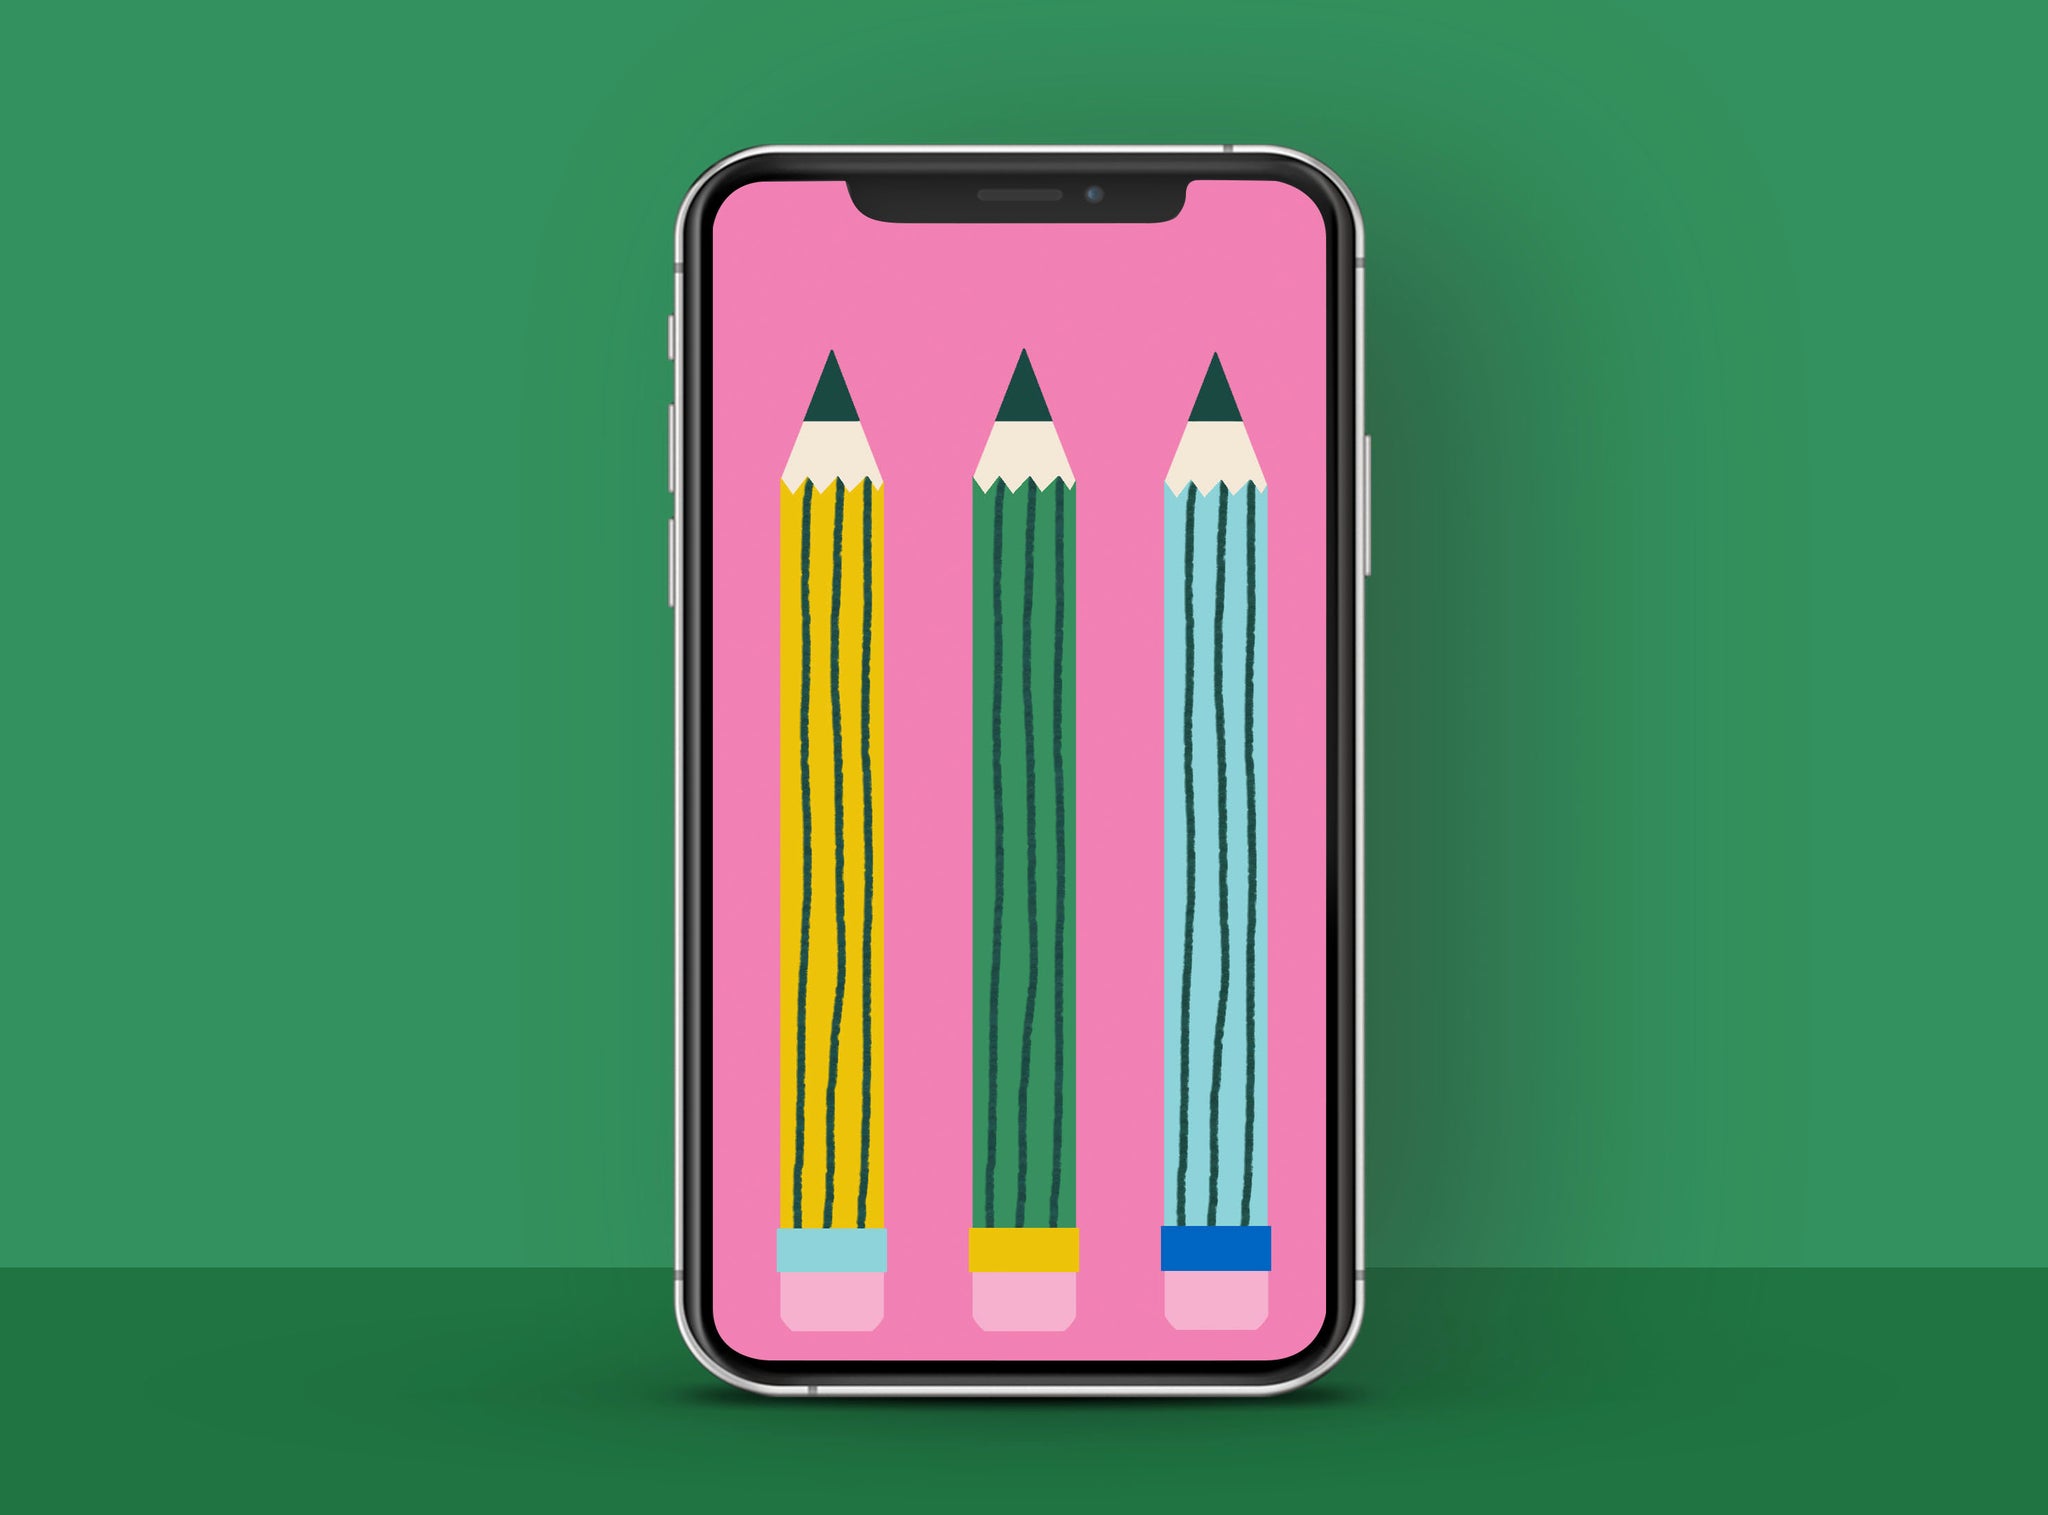 Free HD phone wallpaper with colourful illustrated pencils | Raspberry Blossom